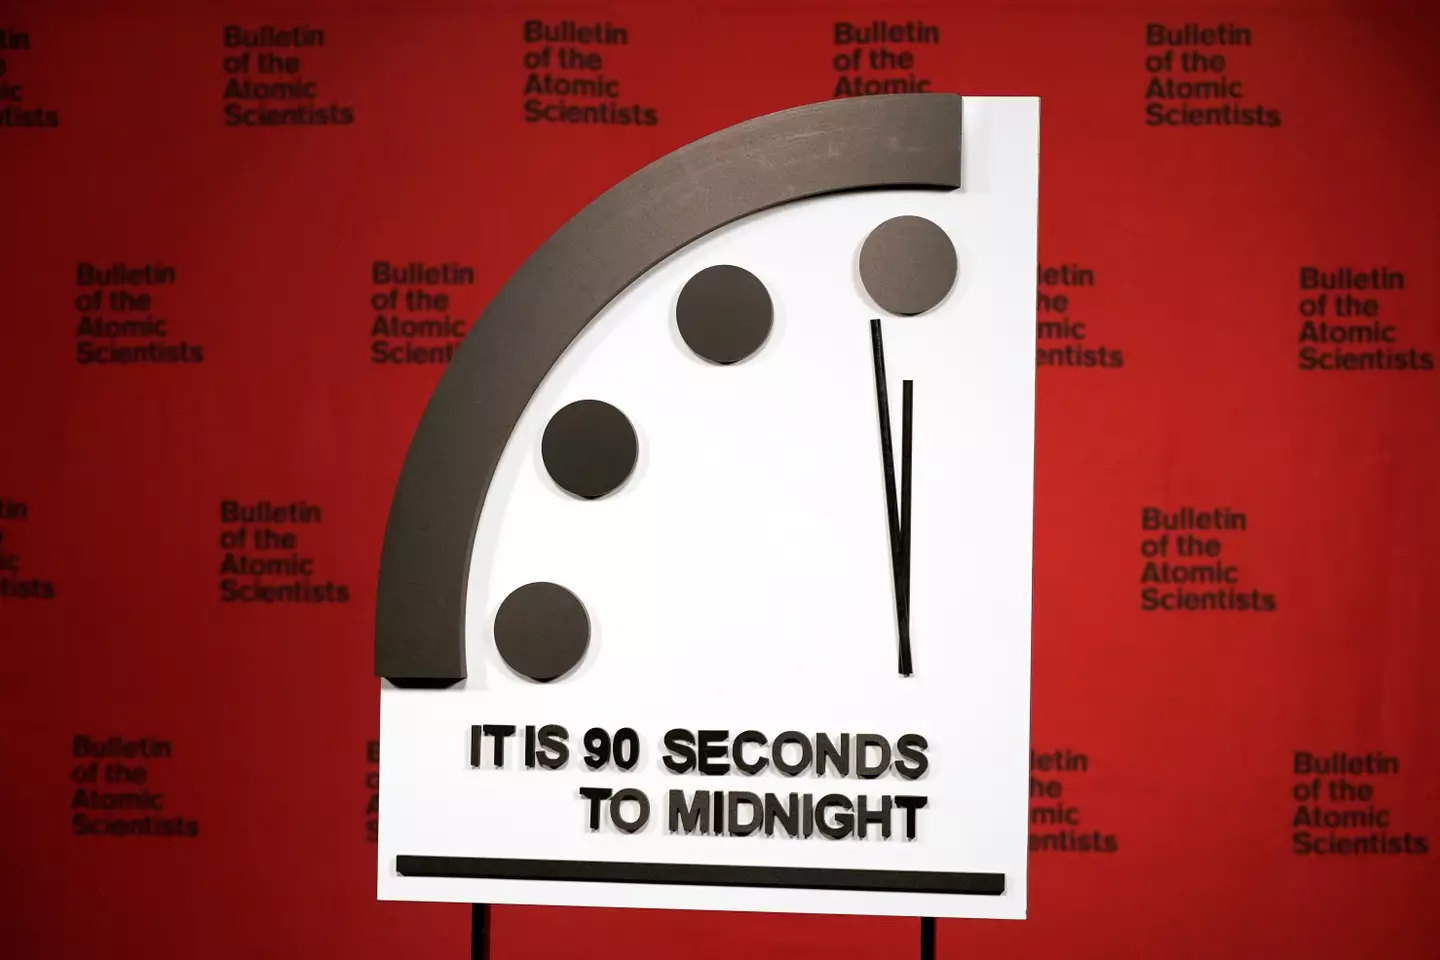 it is now 90 seconds to midnight.